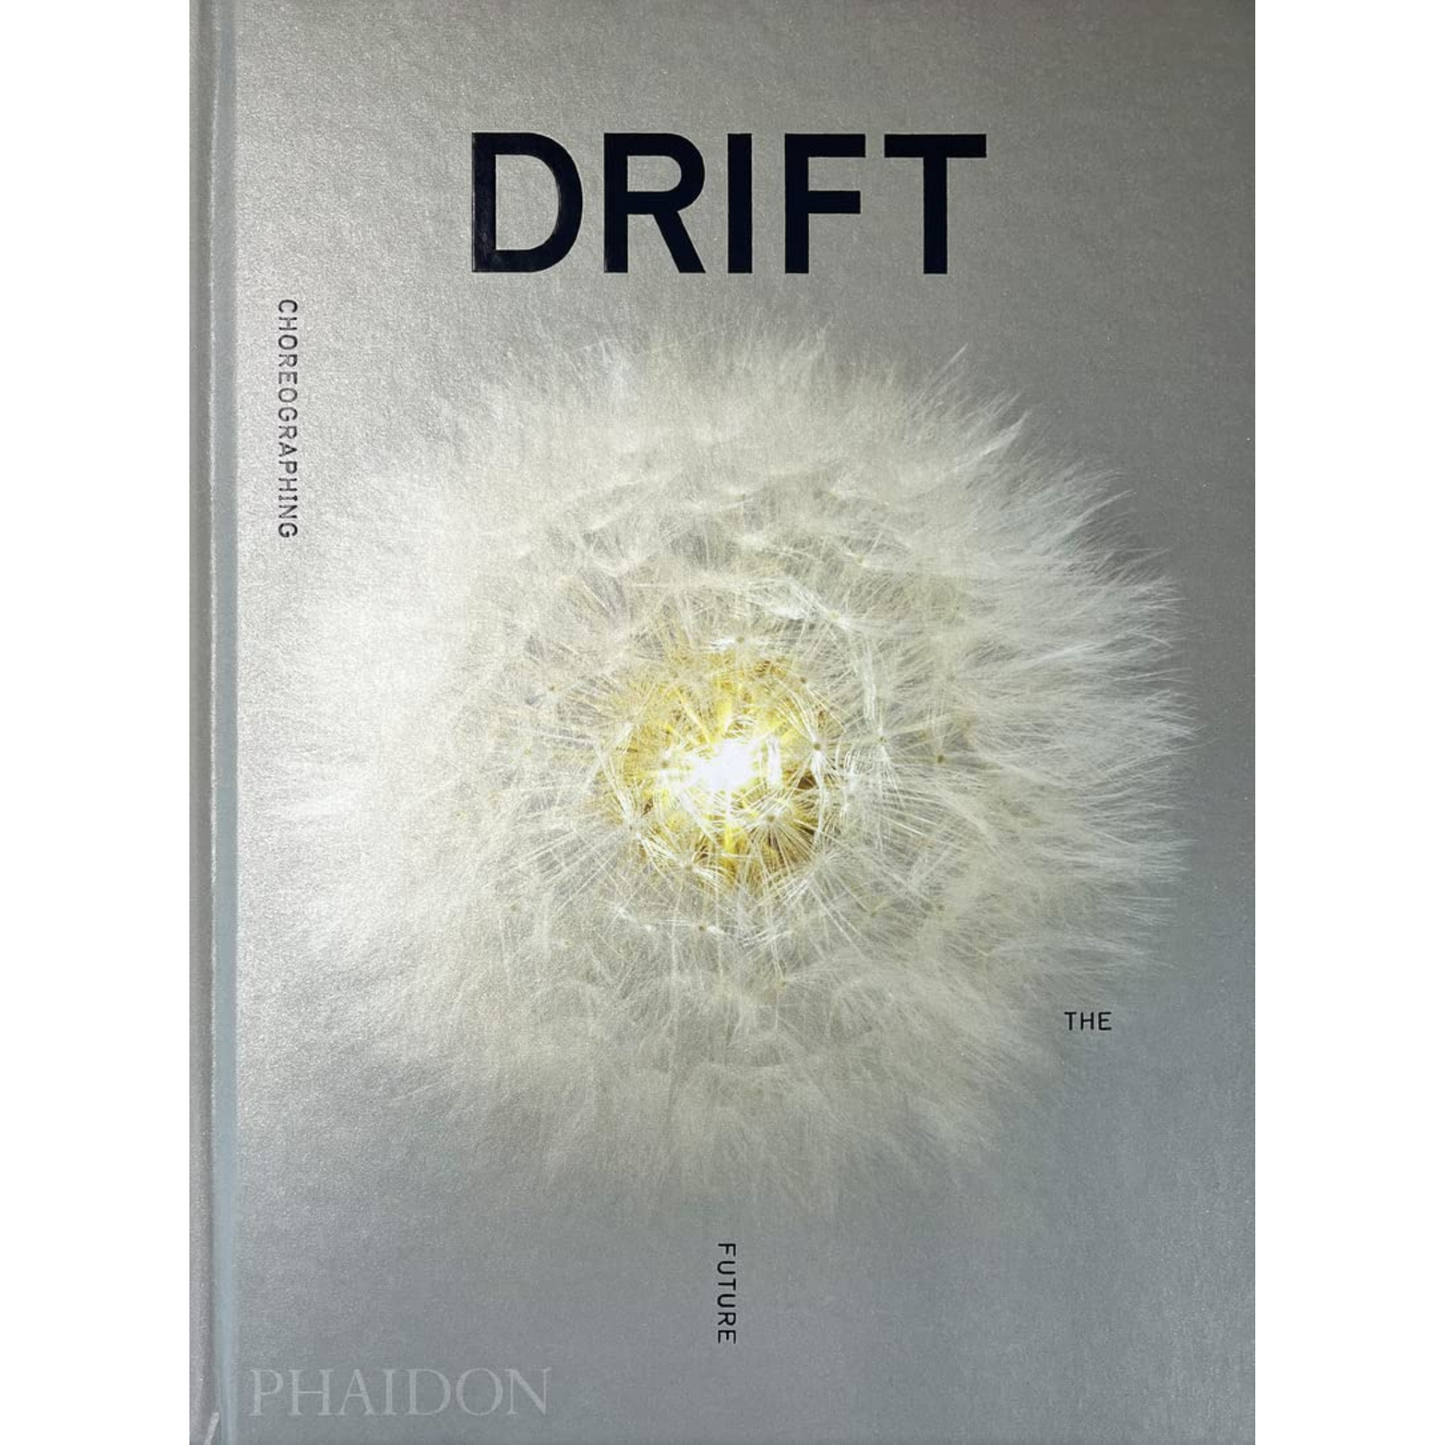 Load image into Gallery viewer, Cover of DRIFT with close up of dandelion.
